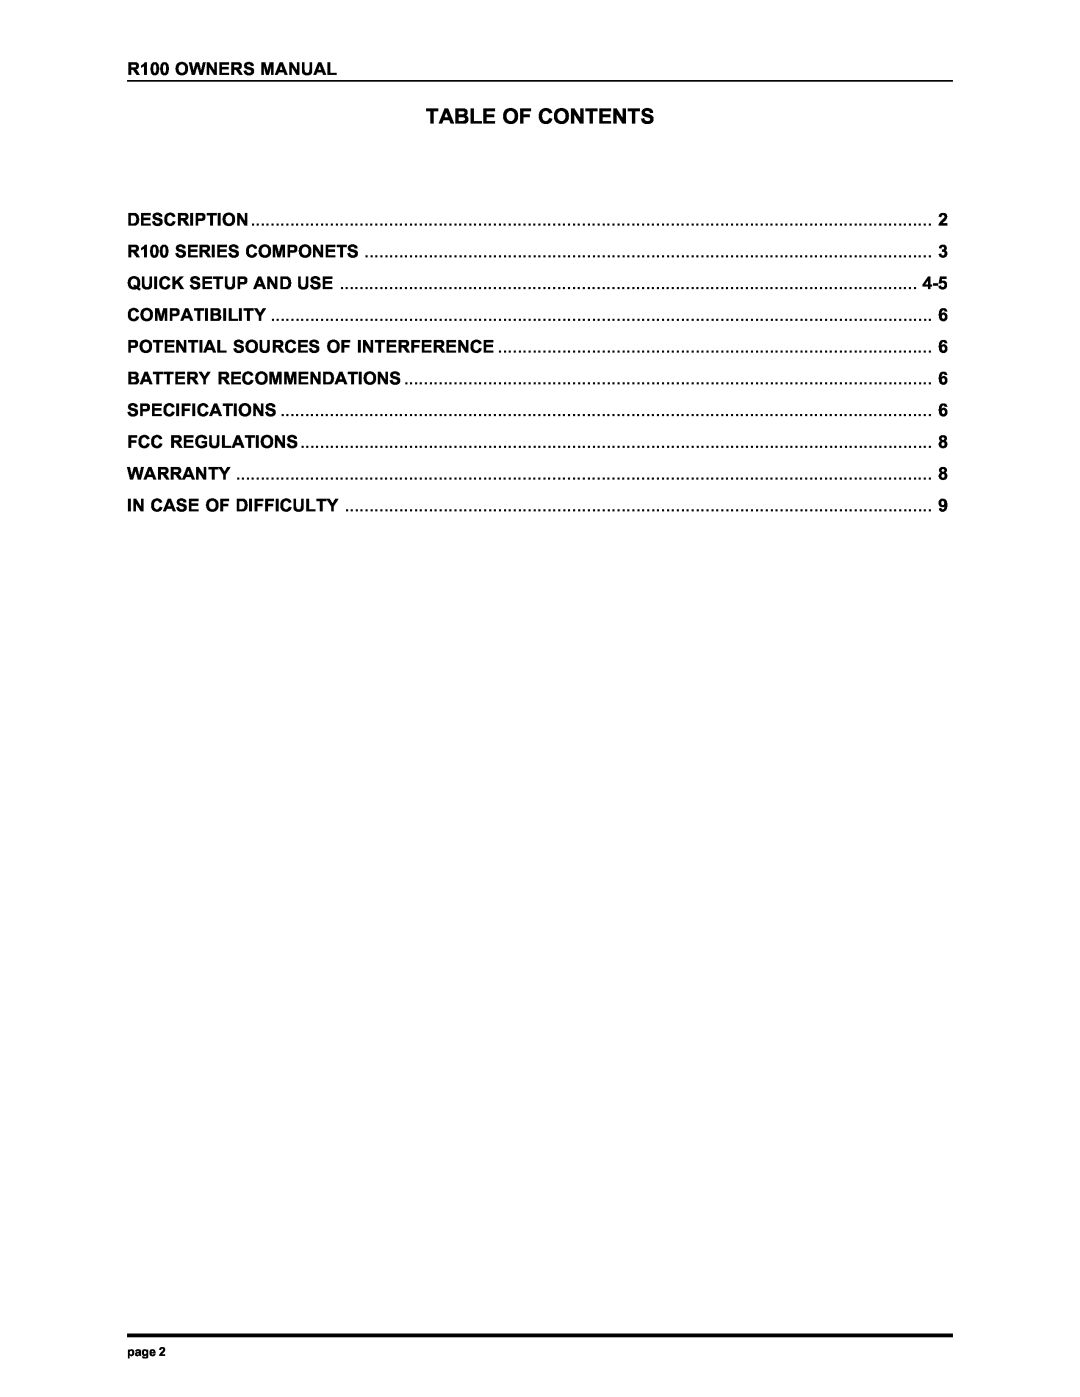 Electro-Voice R100 manual Table Of Contents 